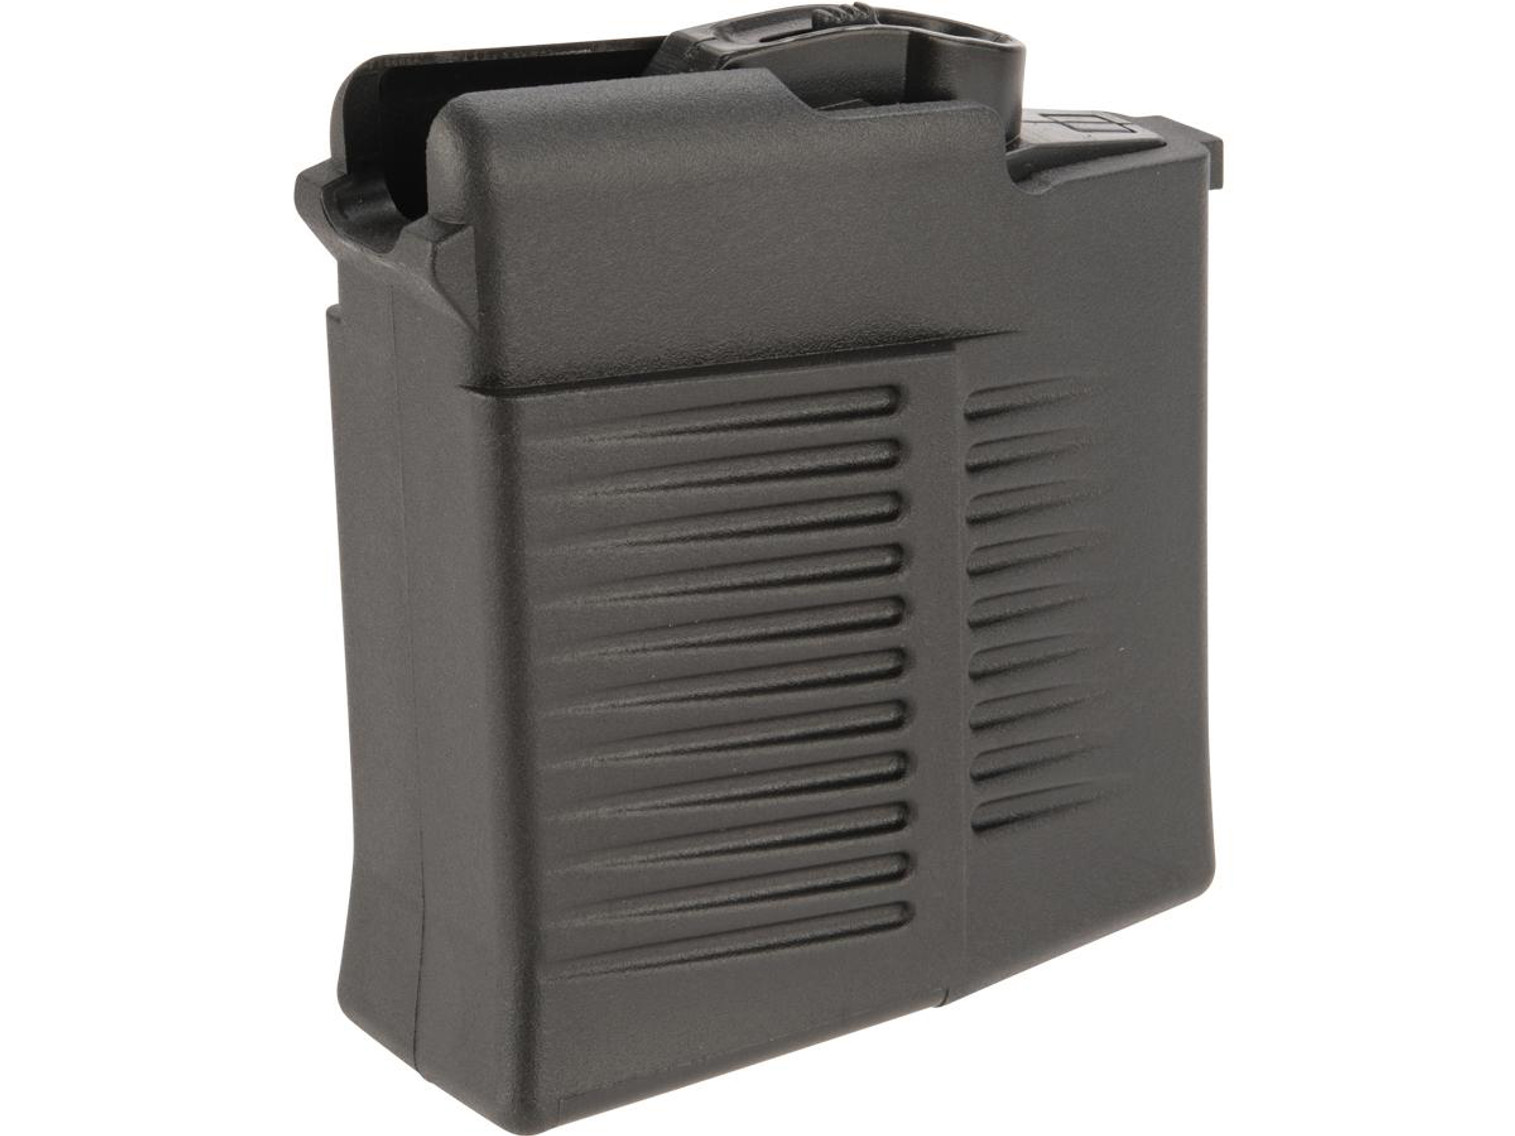 ARES 40rd Spare Magazine for Otto Repa SOC SLR Rifle